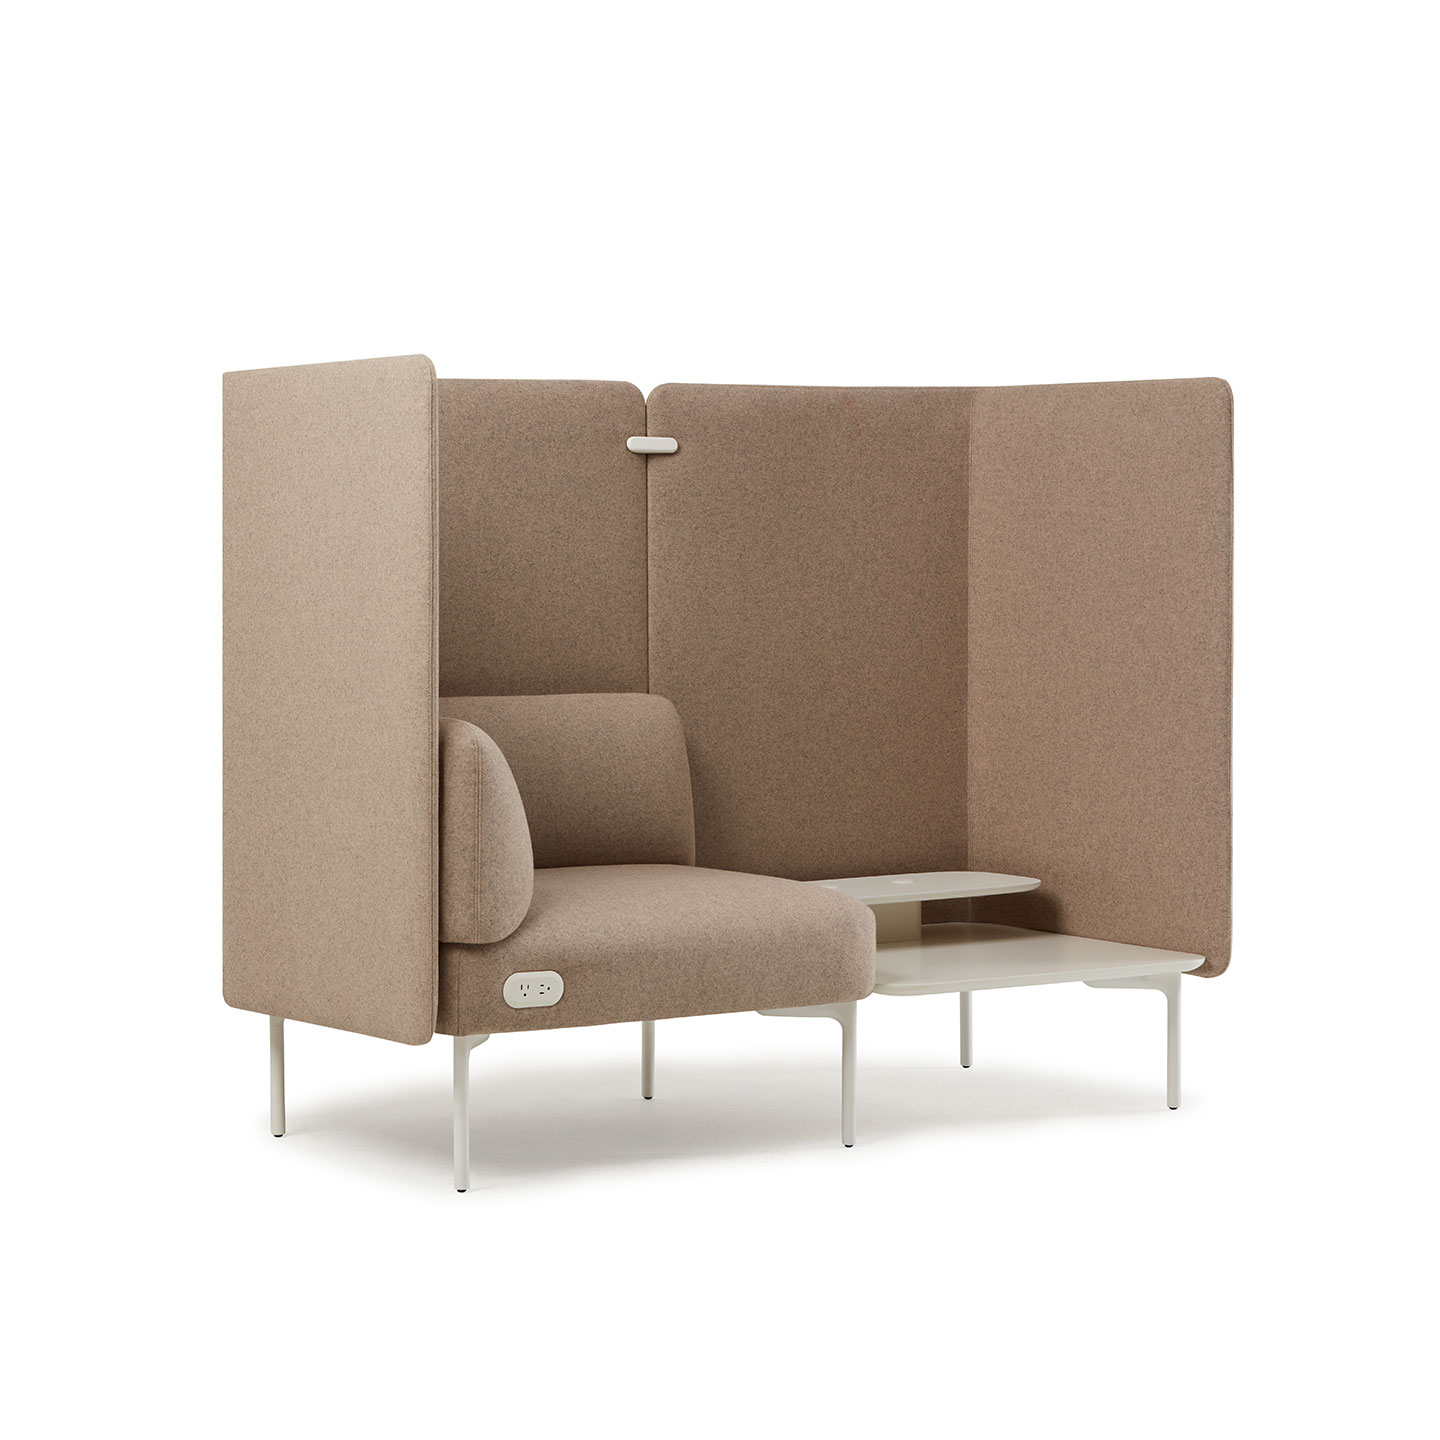 Haworth Cabana lounge in brown with small white table next to it with tall booth surronding